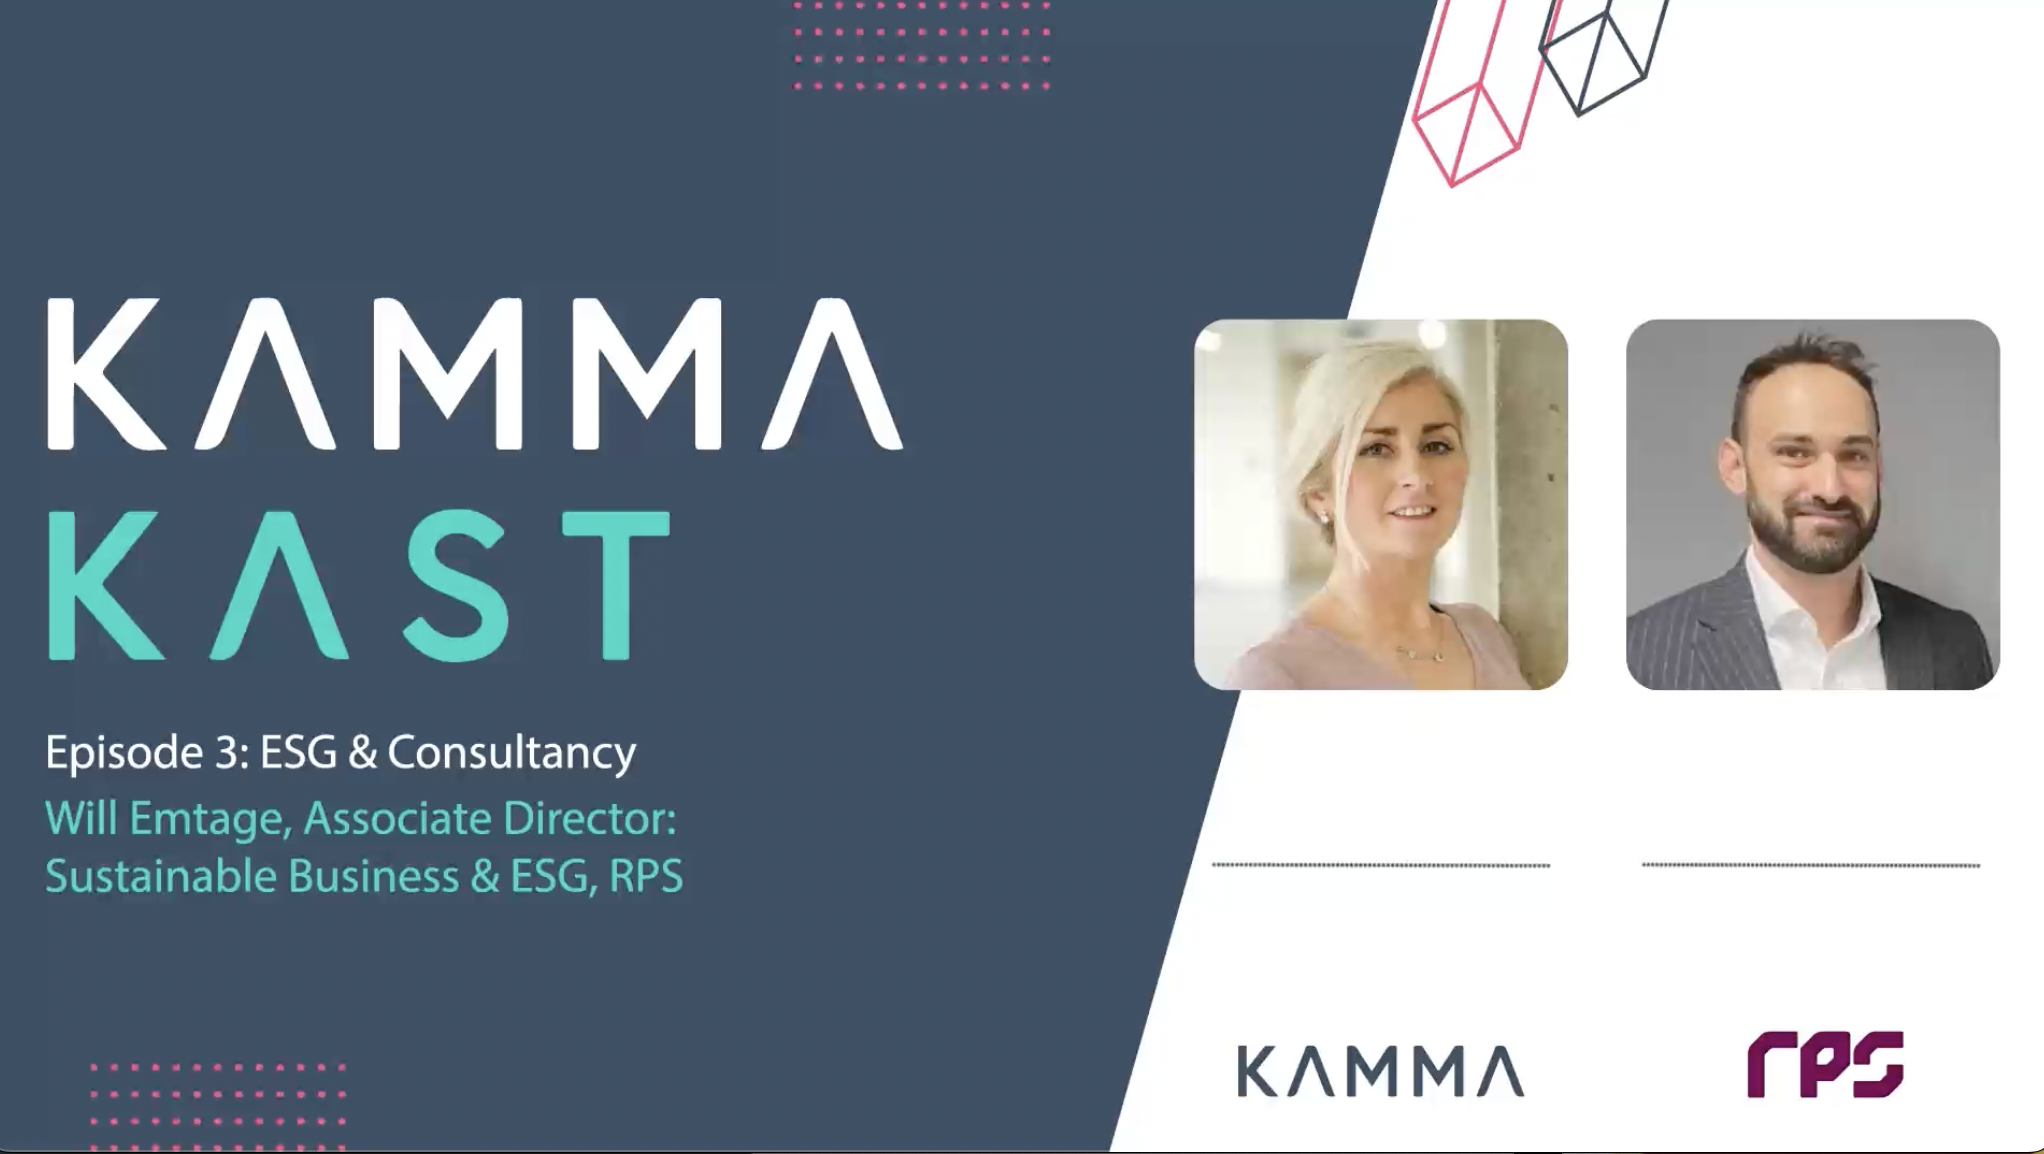 In this third episode of KammaKast, Kamma’s CEO Orla Shields is joined by Will Emtage, Associate Director for ESG at RPS